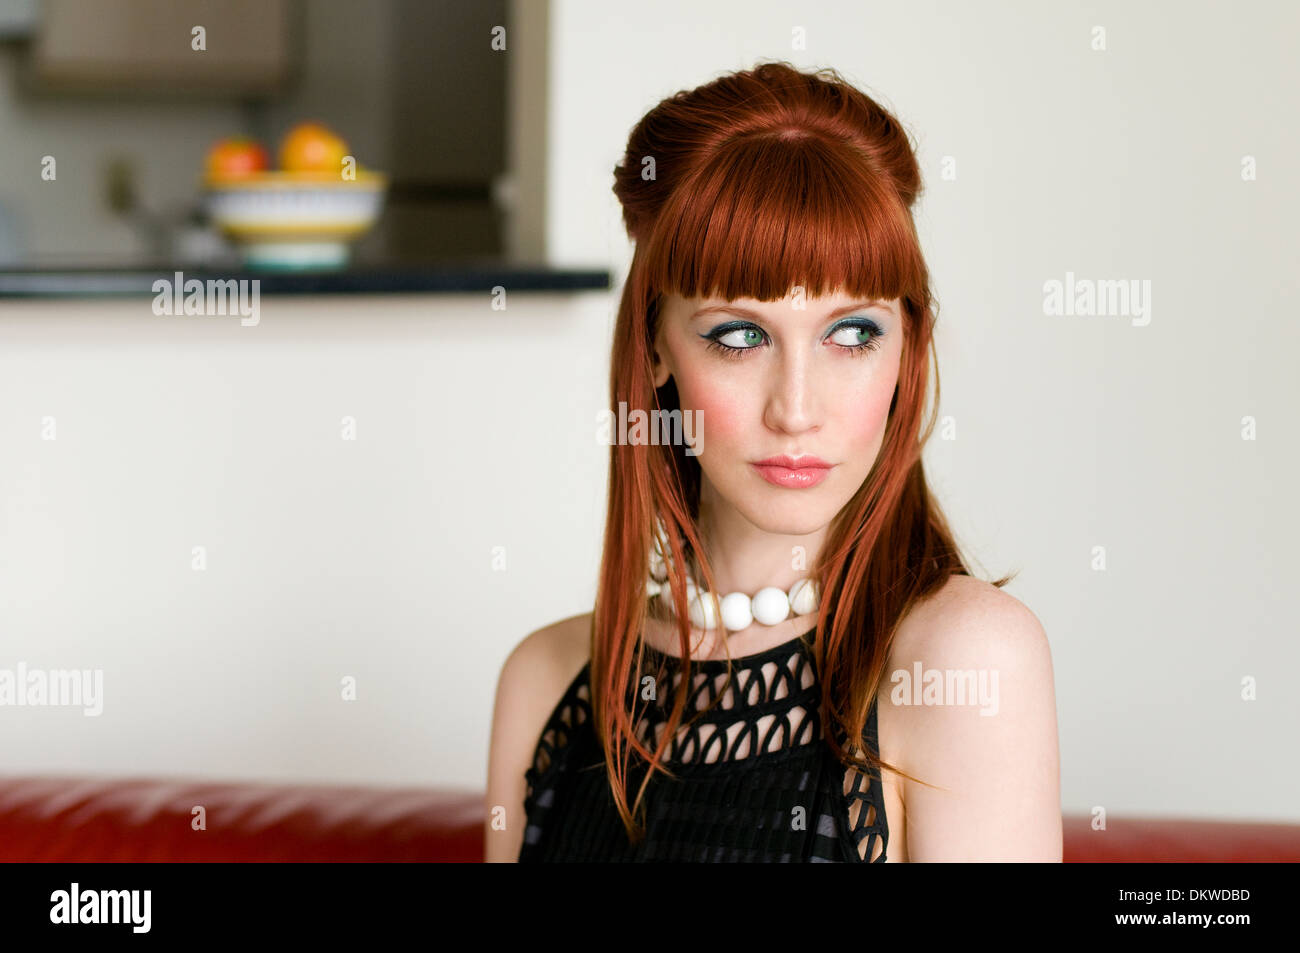 Portrait of a young pretty red hair lady Stock Photo